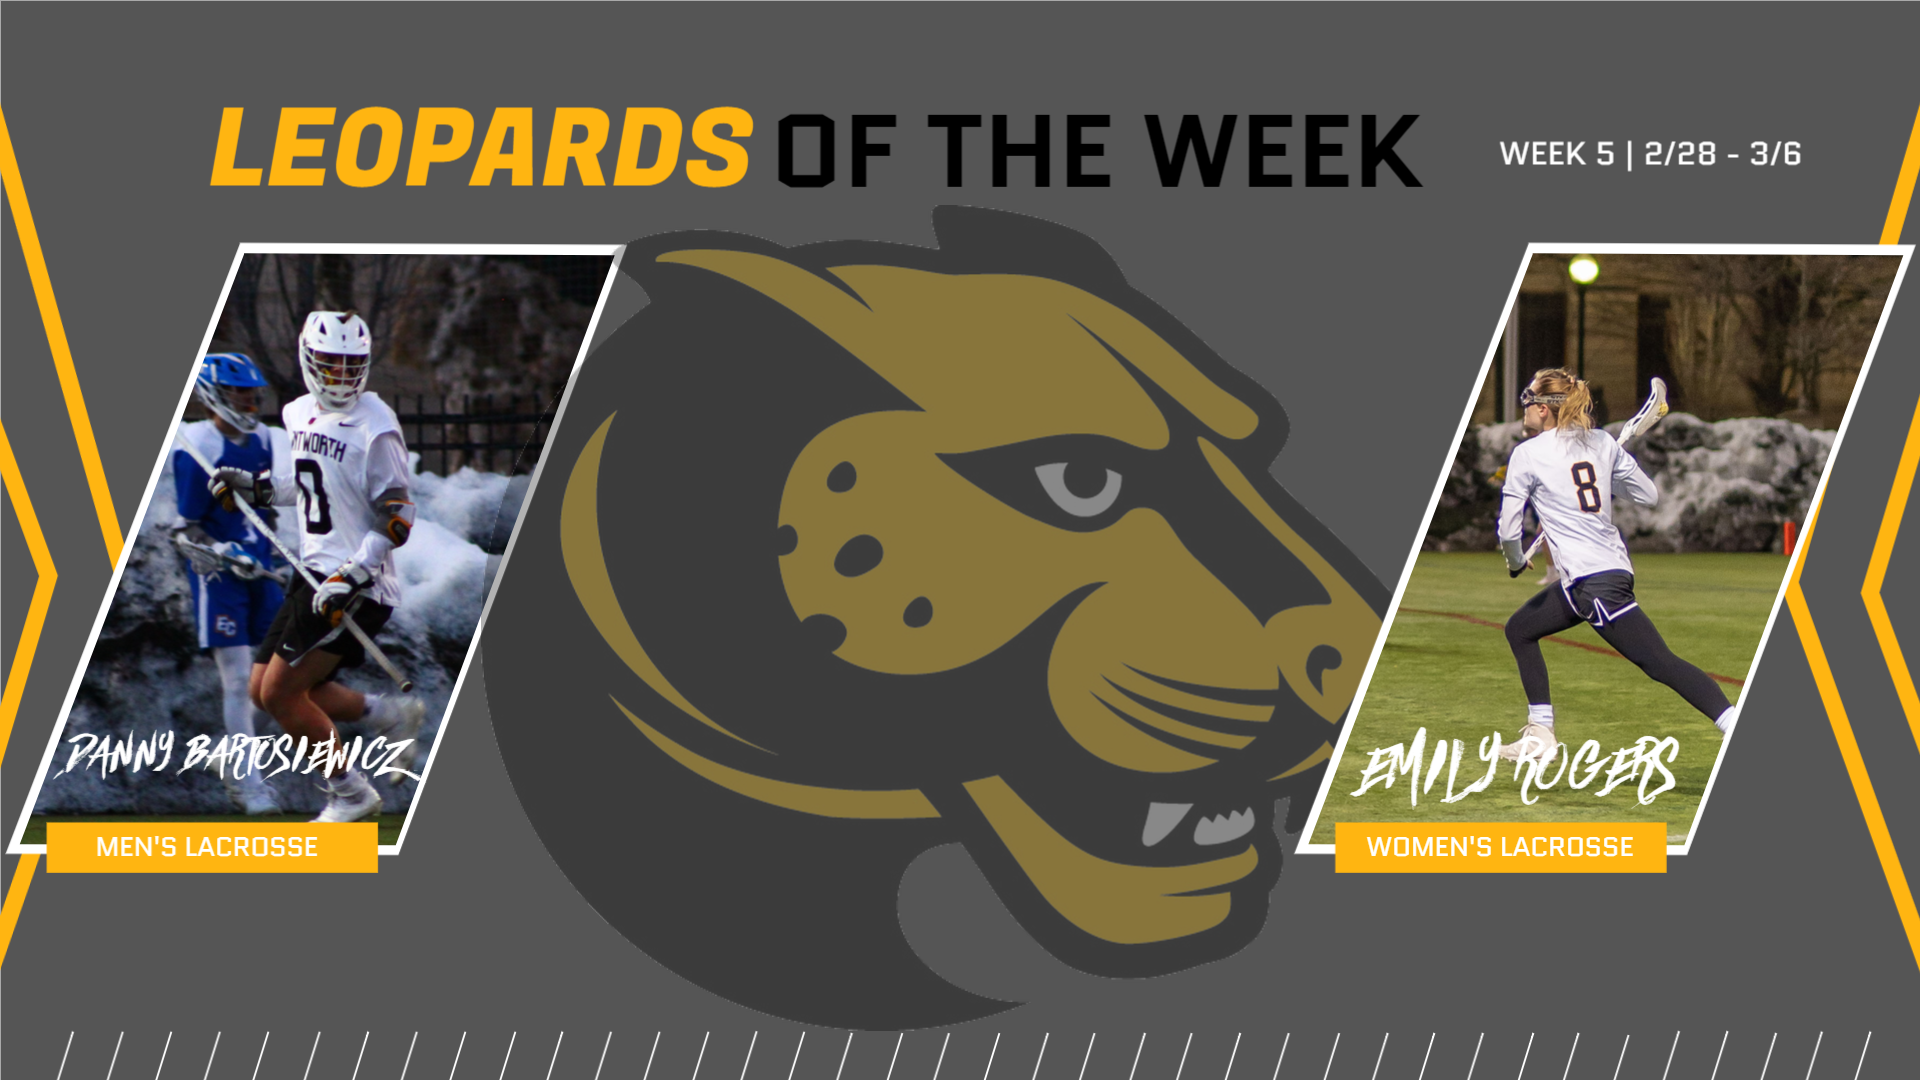 Bartosiewicz and Rogers Announced as Leopards of the Week